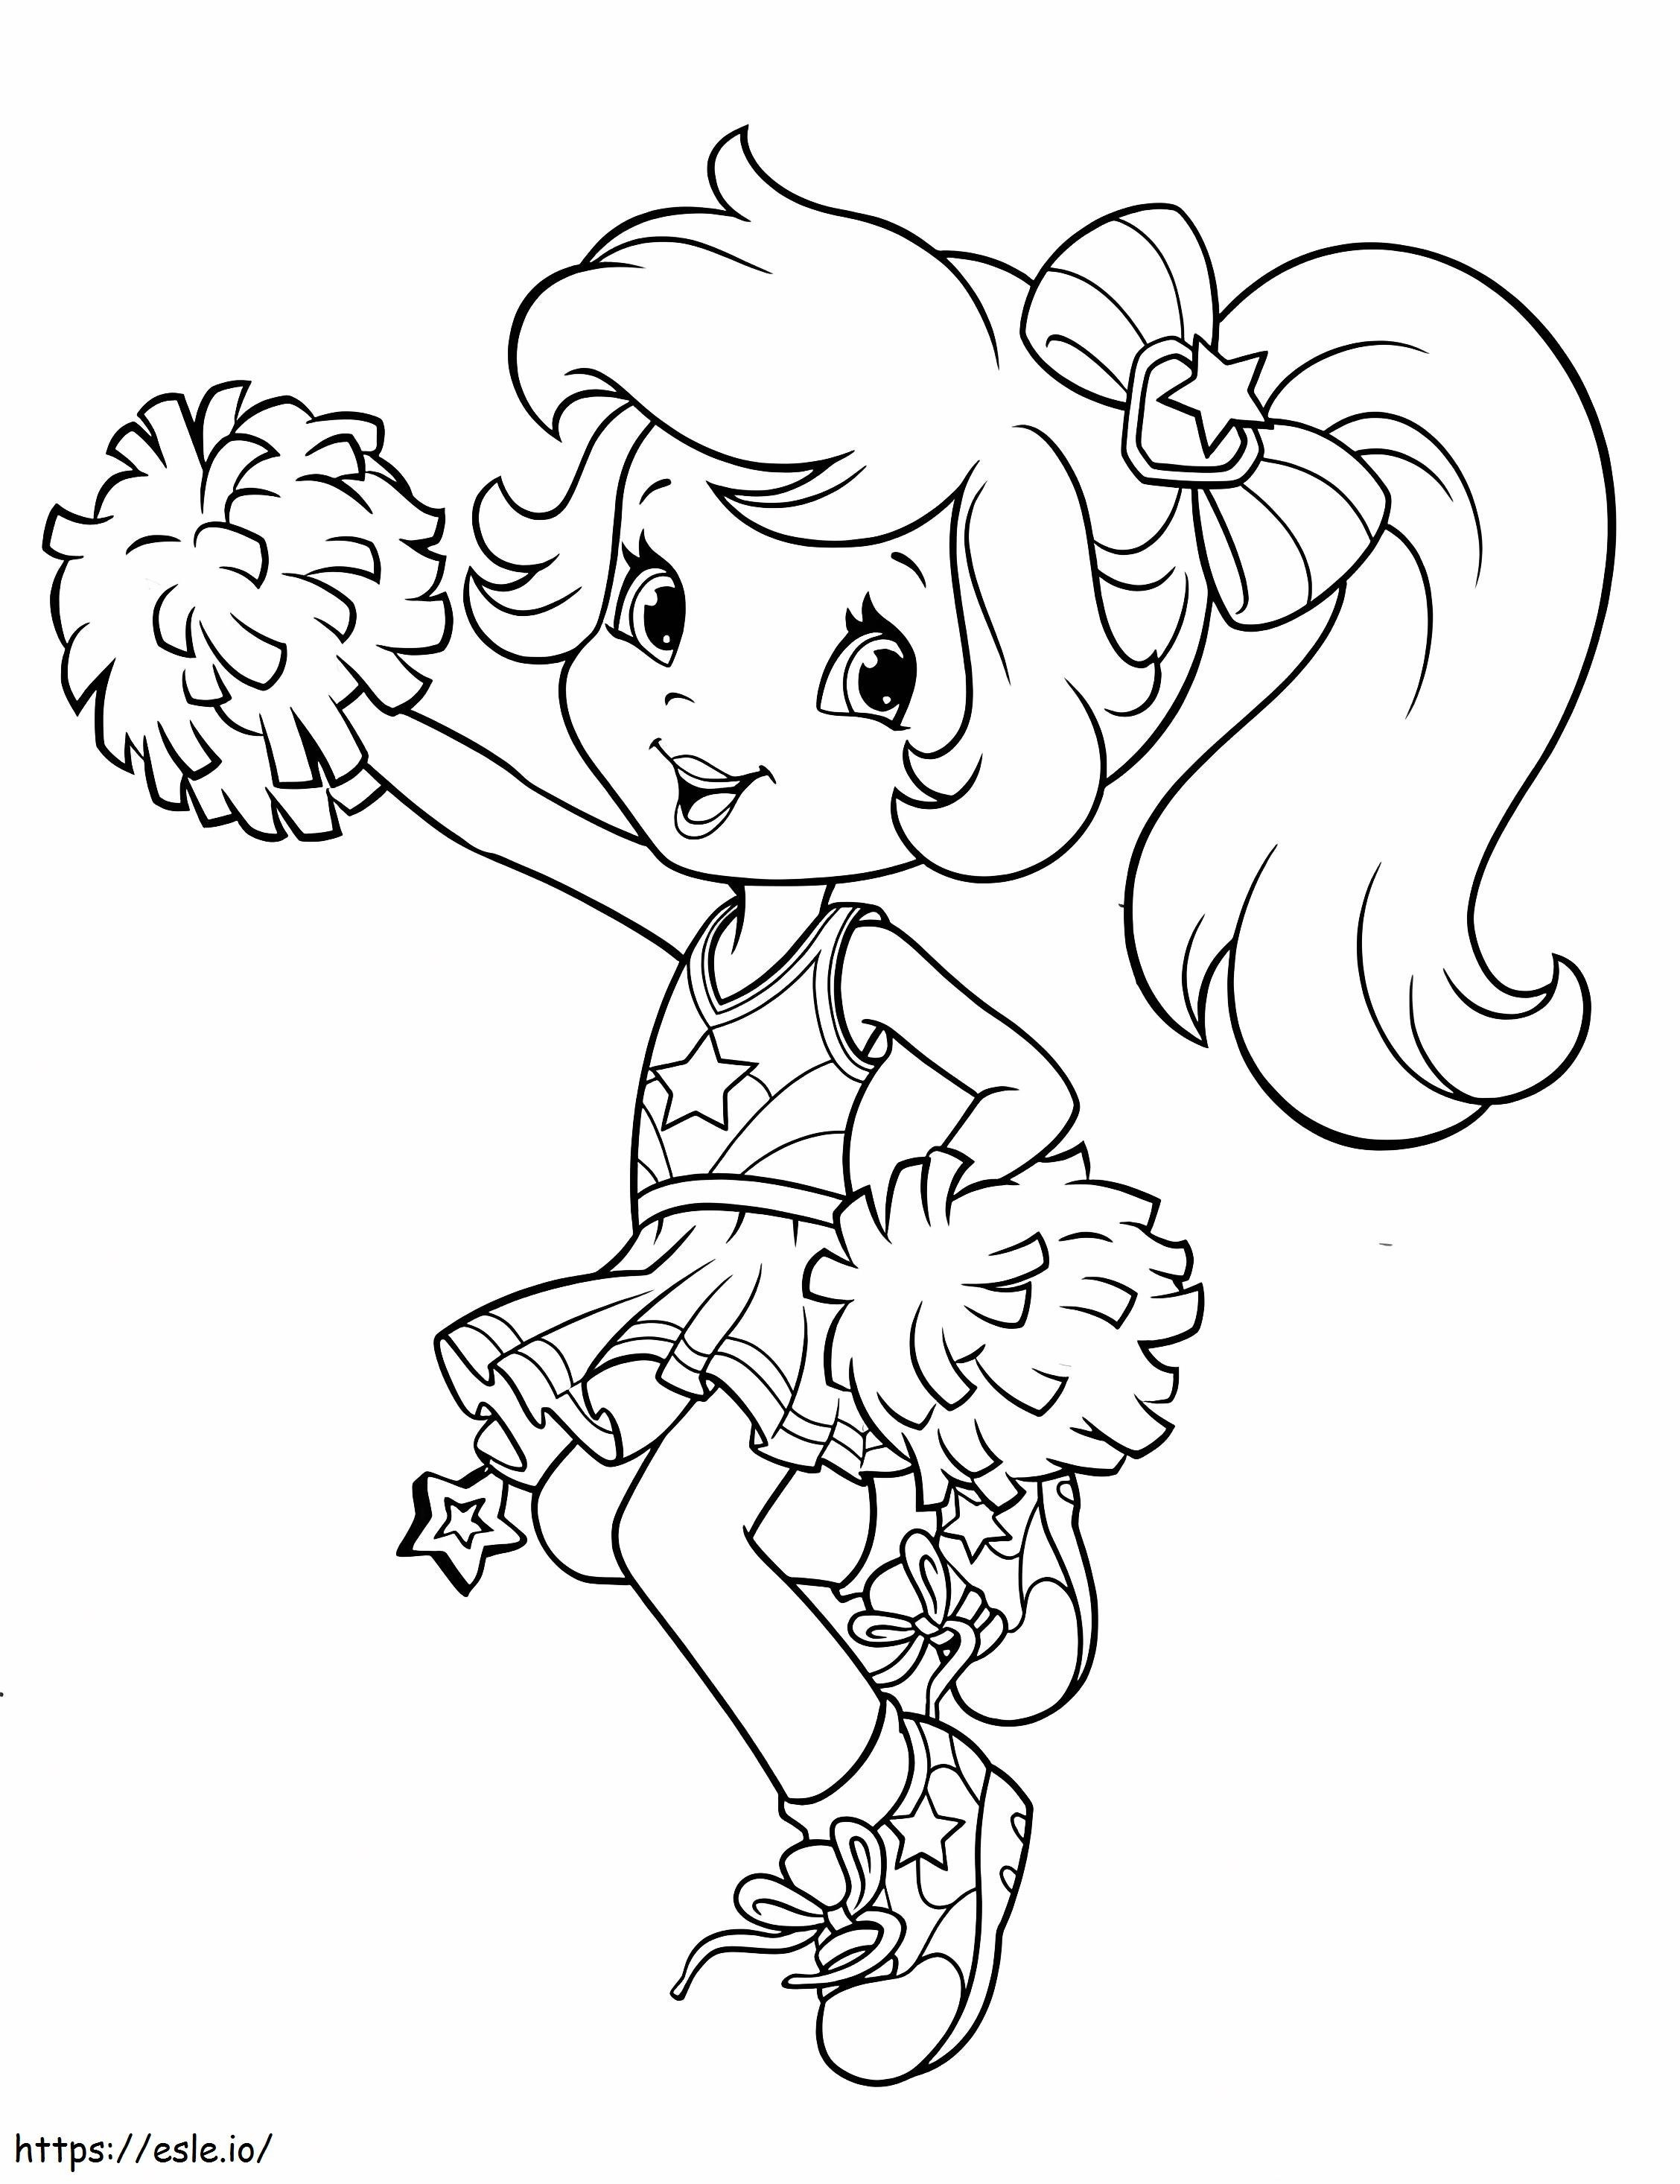 1535184456 Strawberry Shortcake Dancing A4 coloring page